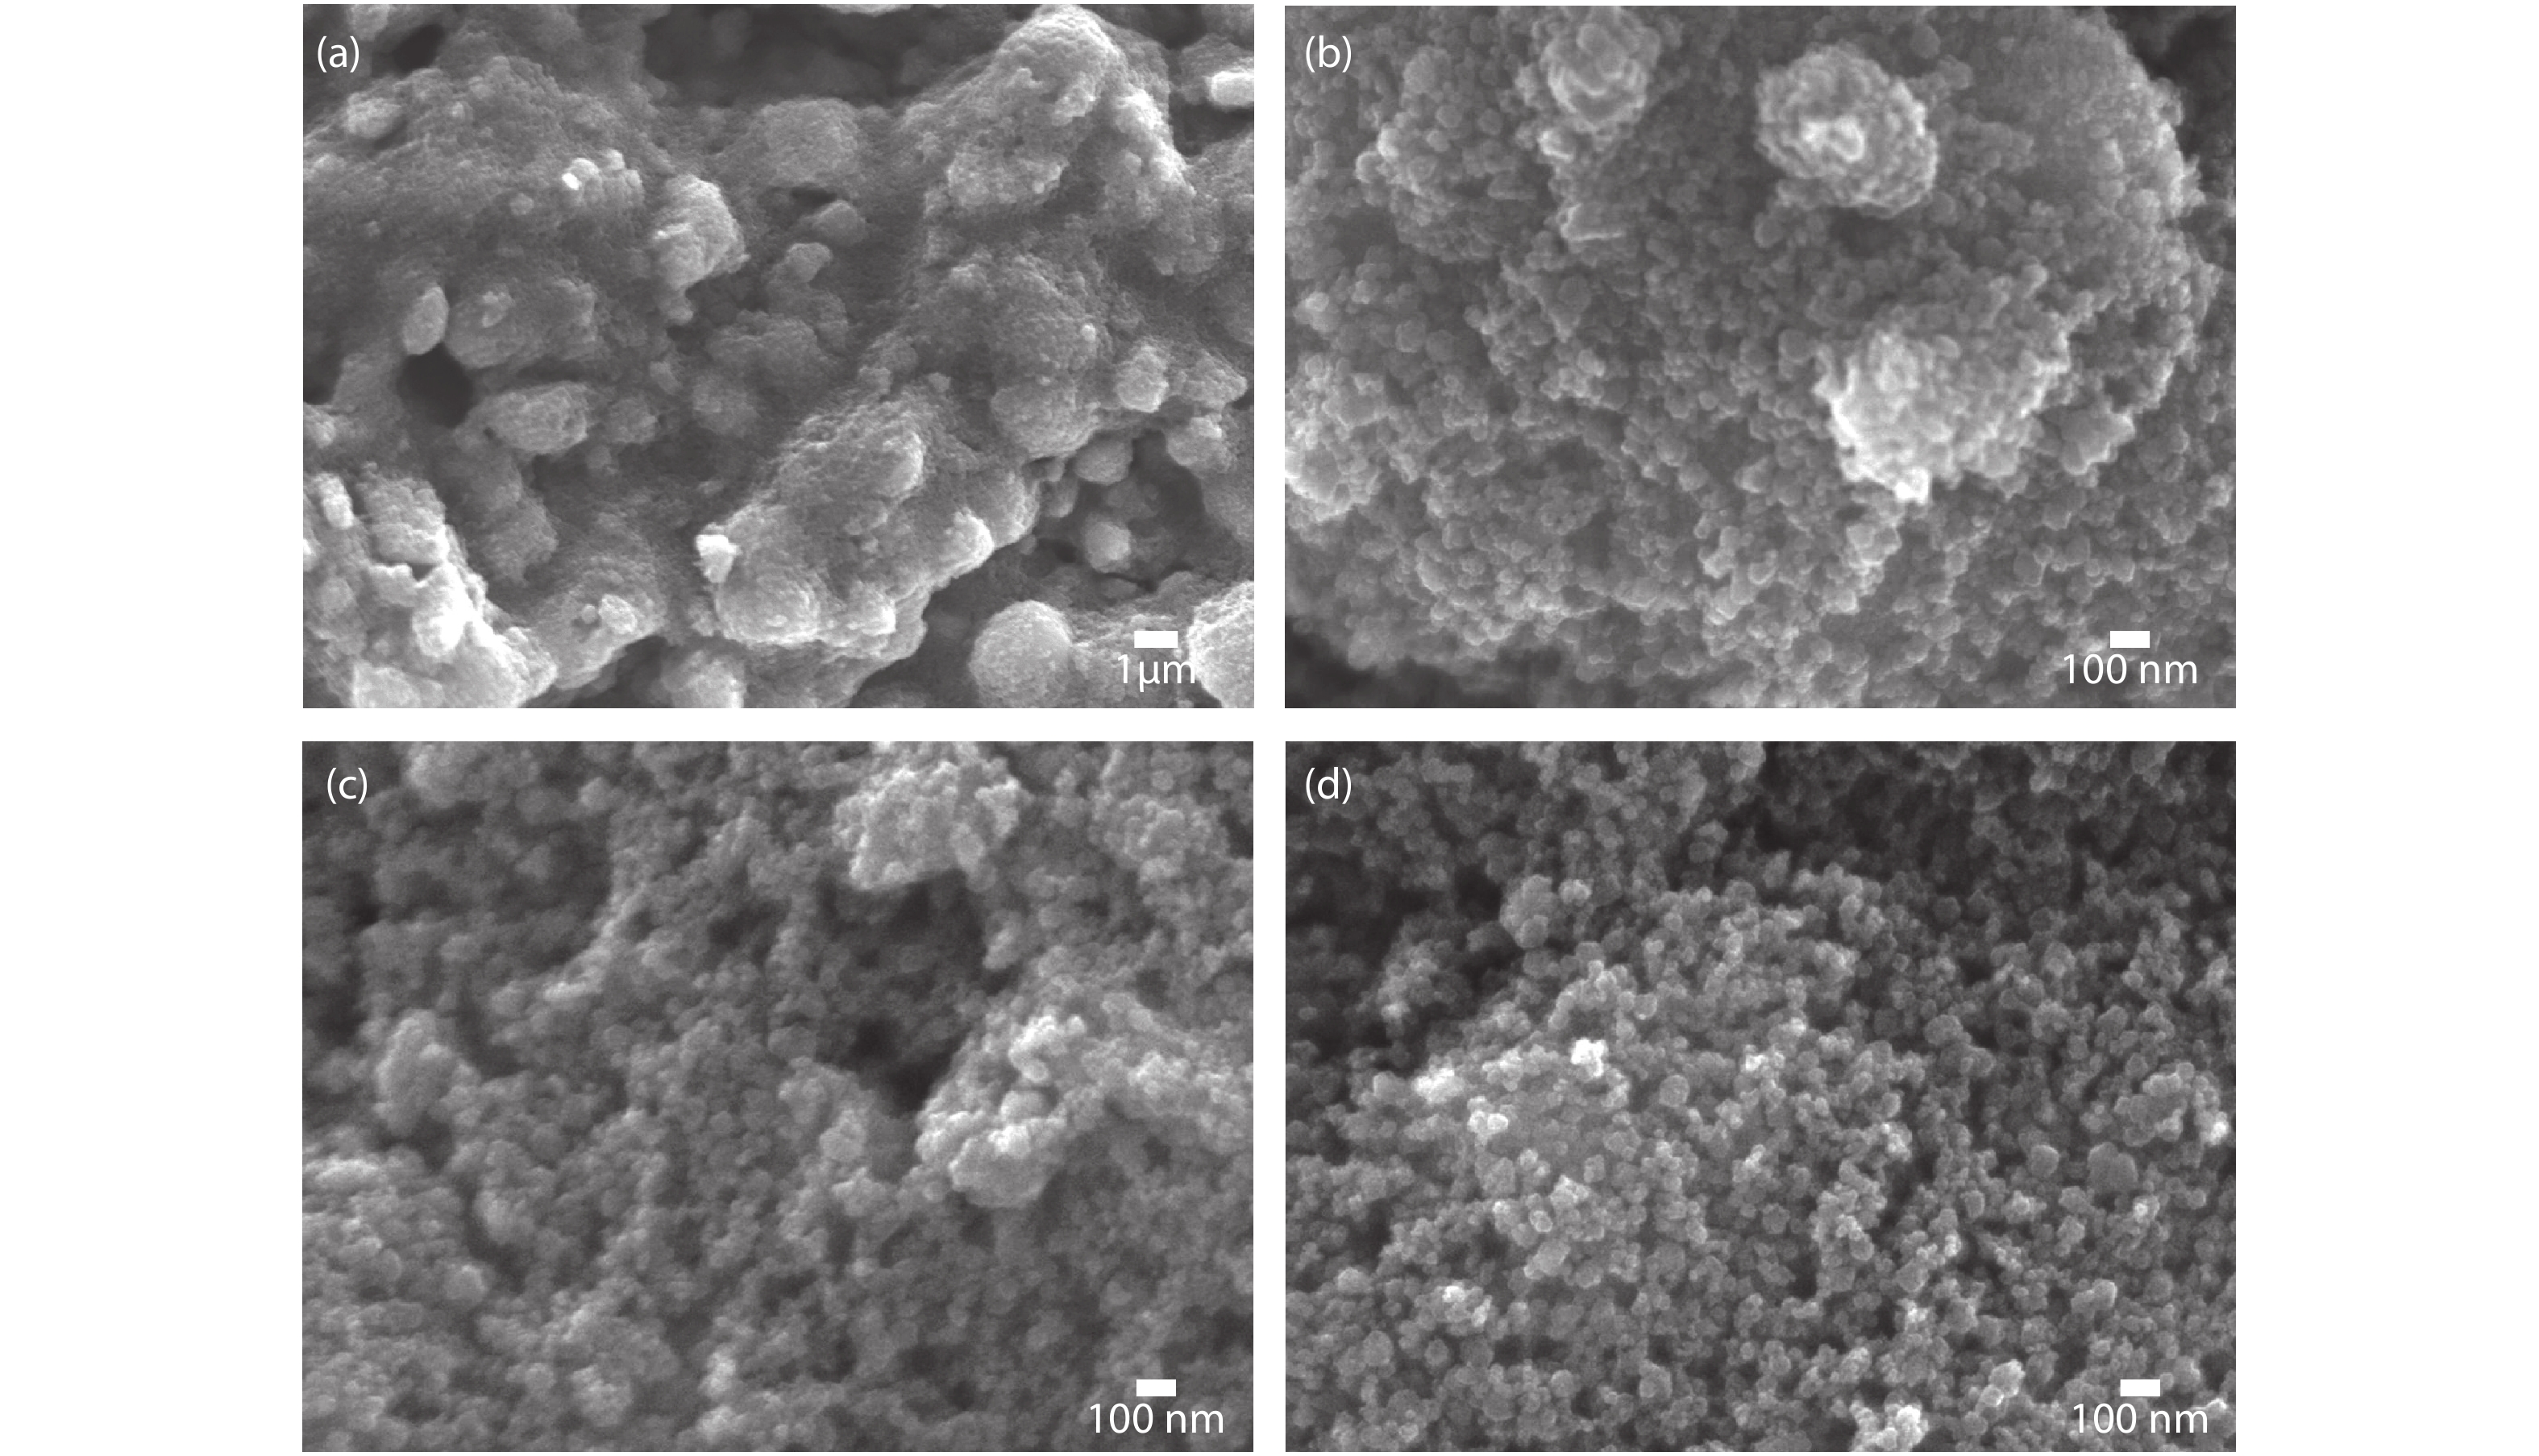 Surface morphology of pristine TiO2 at the magnifications of (a) 1000× and (b) 40 000× showing macroscopic clusters and agglomerated particles respectively, (c, d) WO3 coated TiO2 nanoparticles layer showing randomly distributed TiO2 nanoparticles and the porous nature.